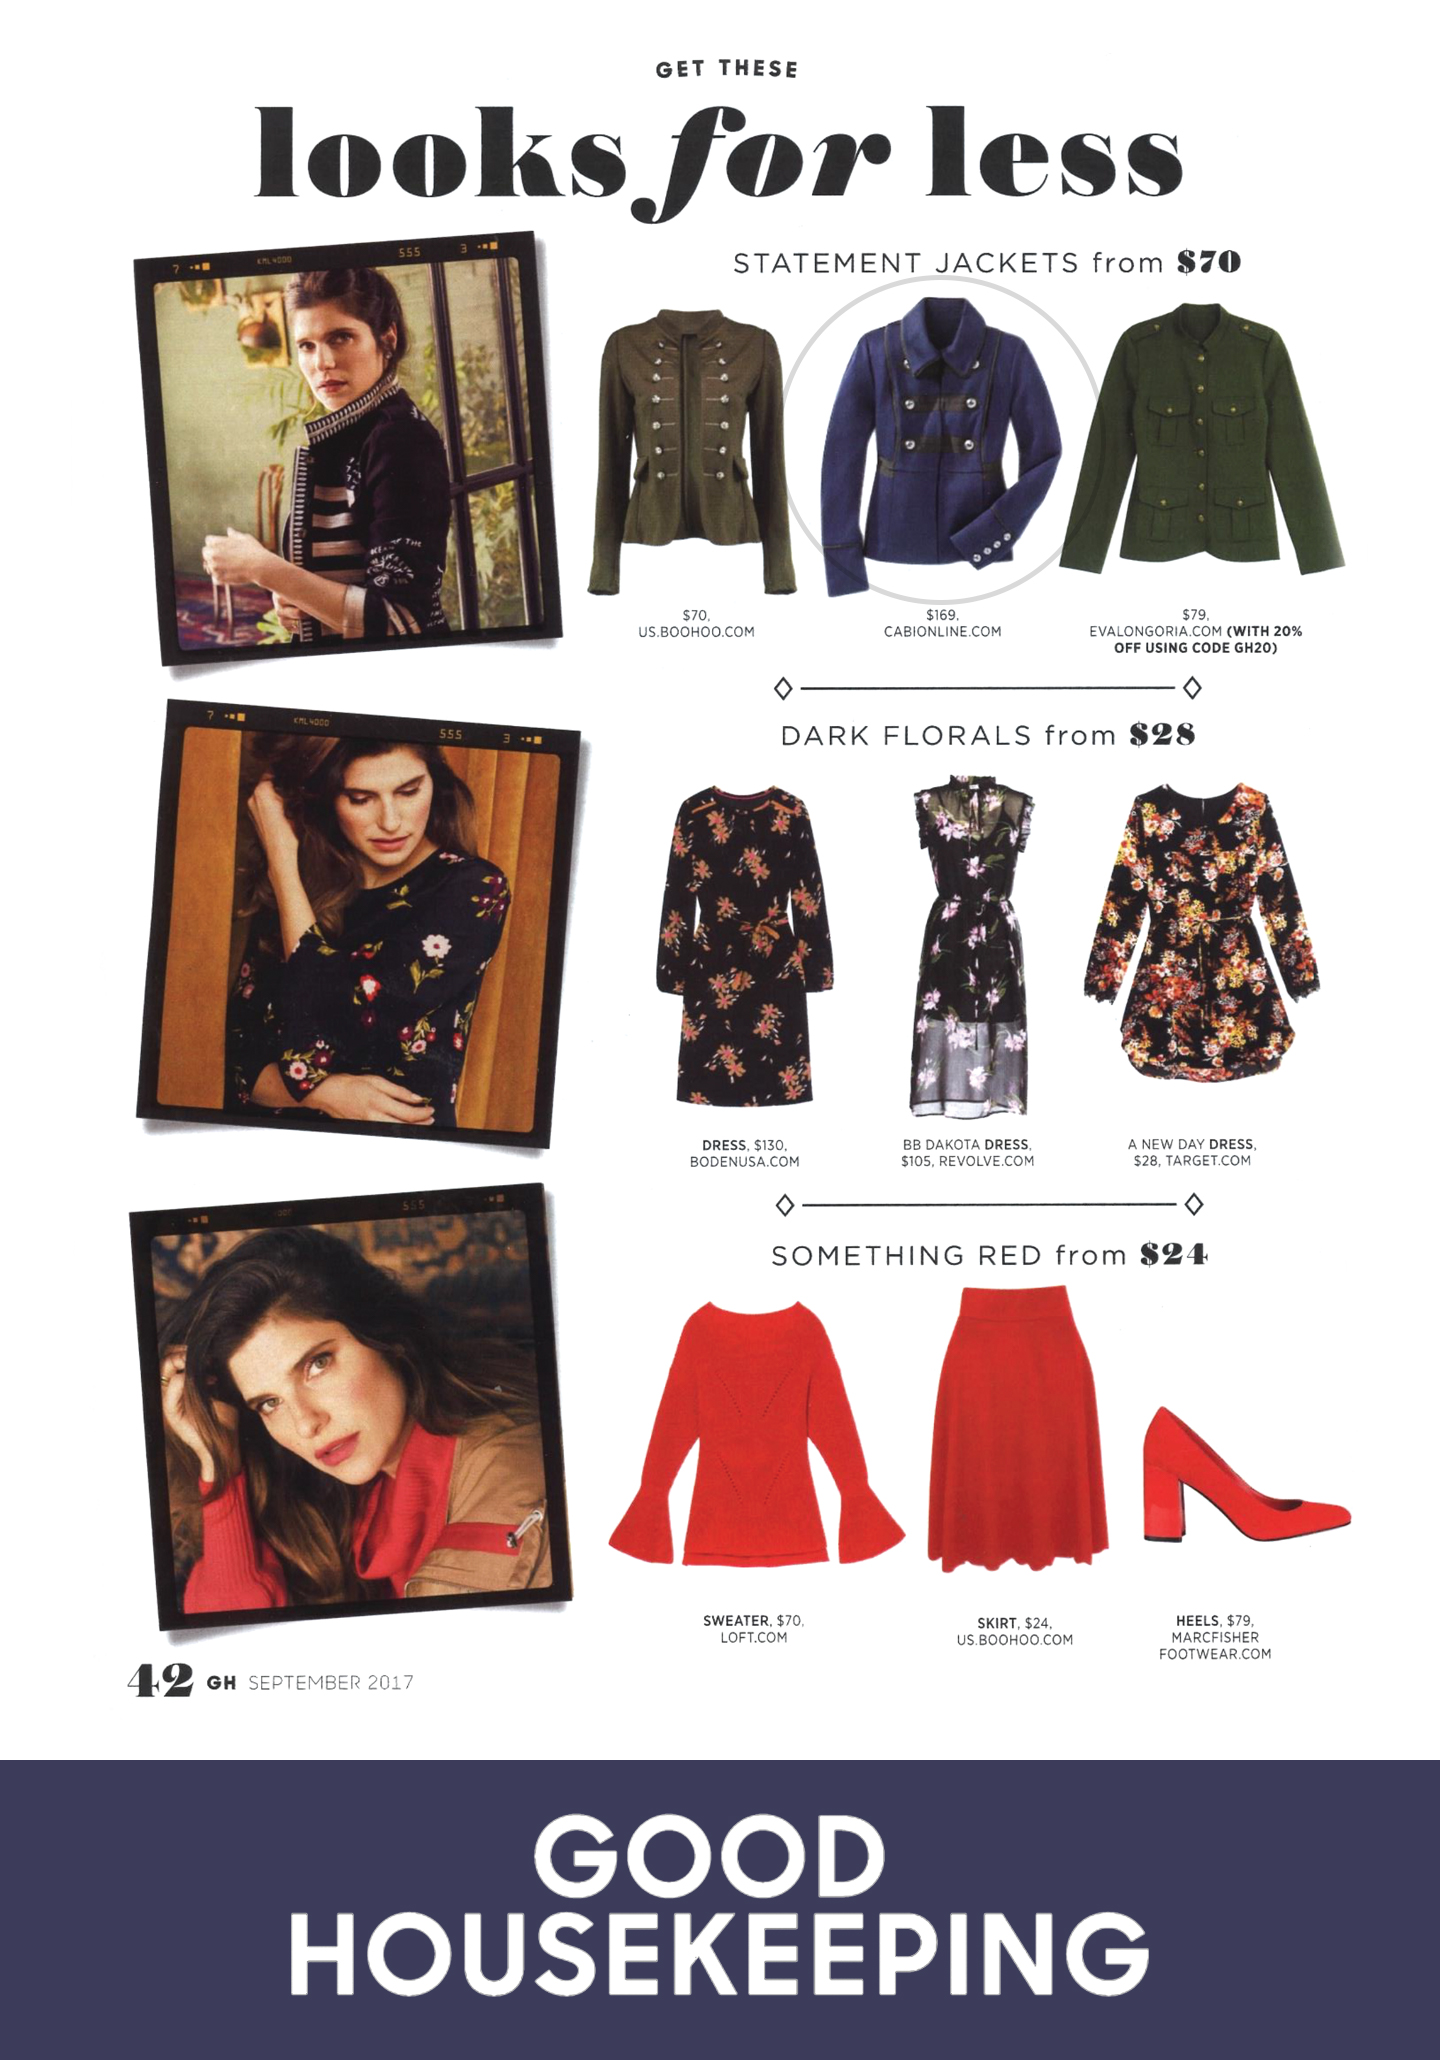 Spotted in Good Housekeeping: cabi's Fall 2017 In the Band Jacket